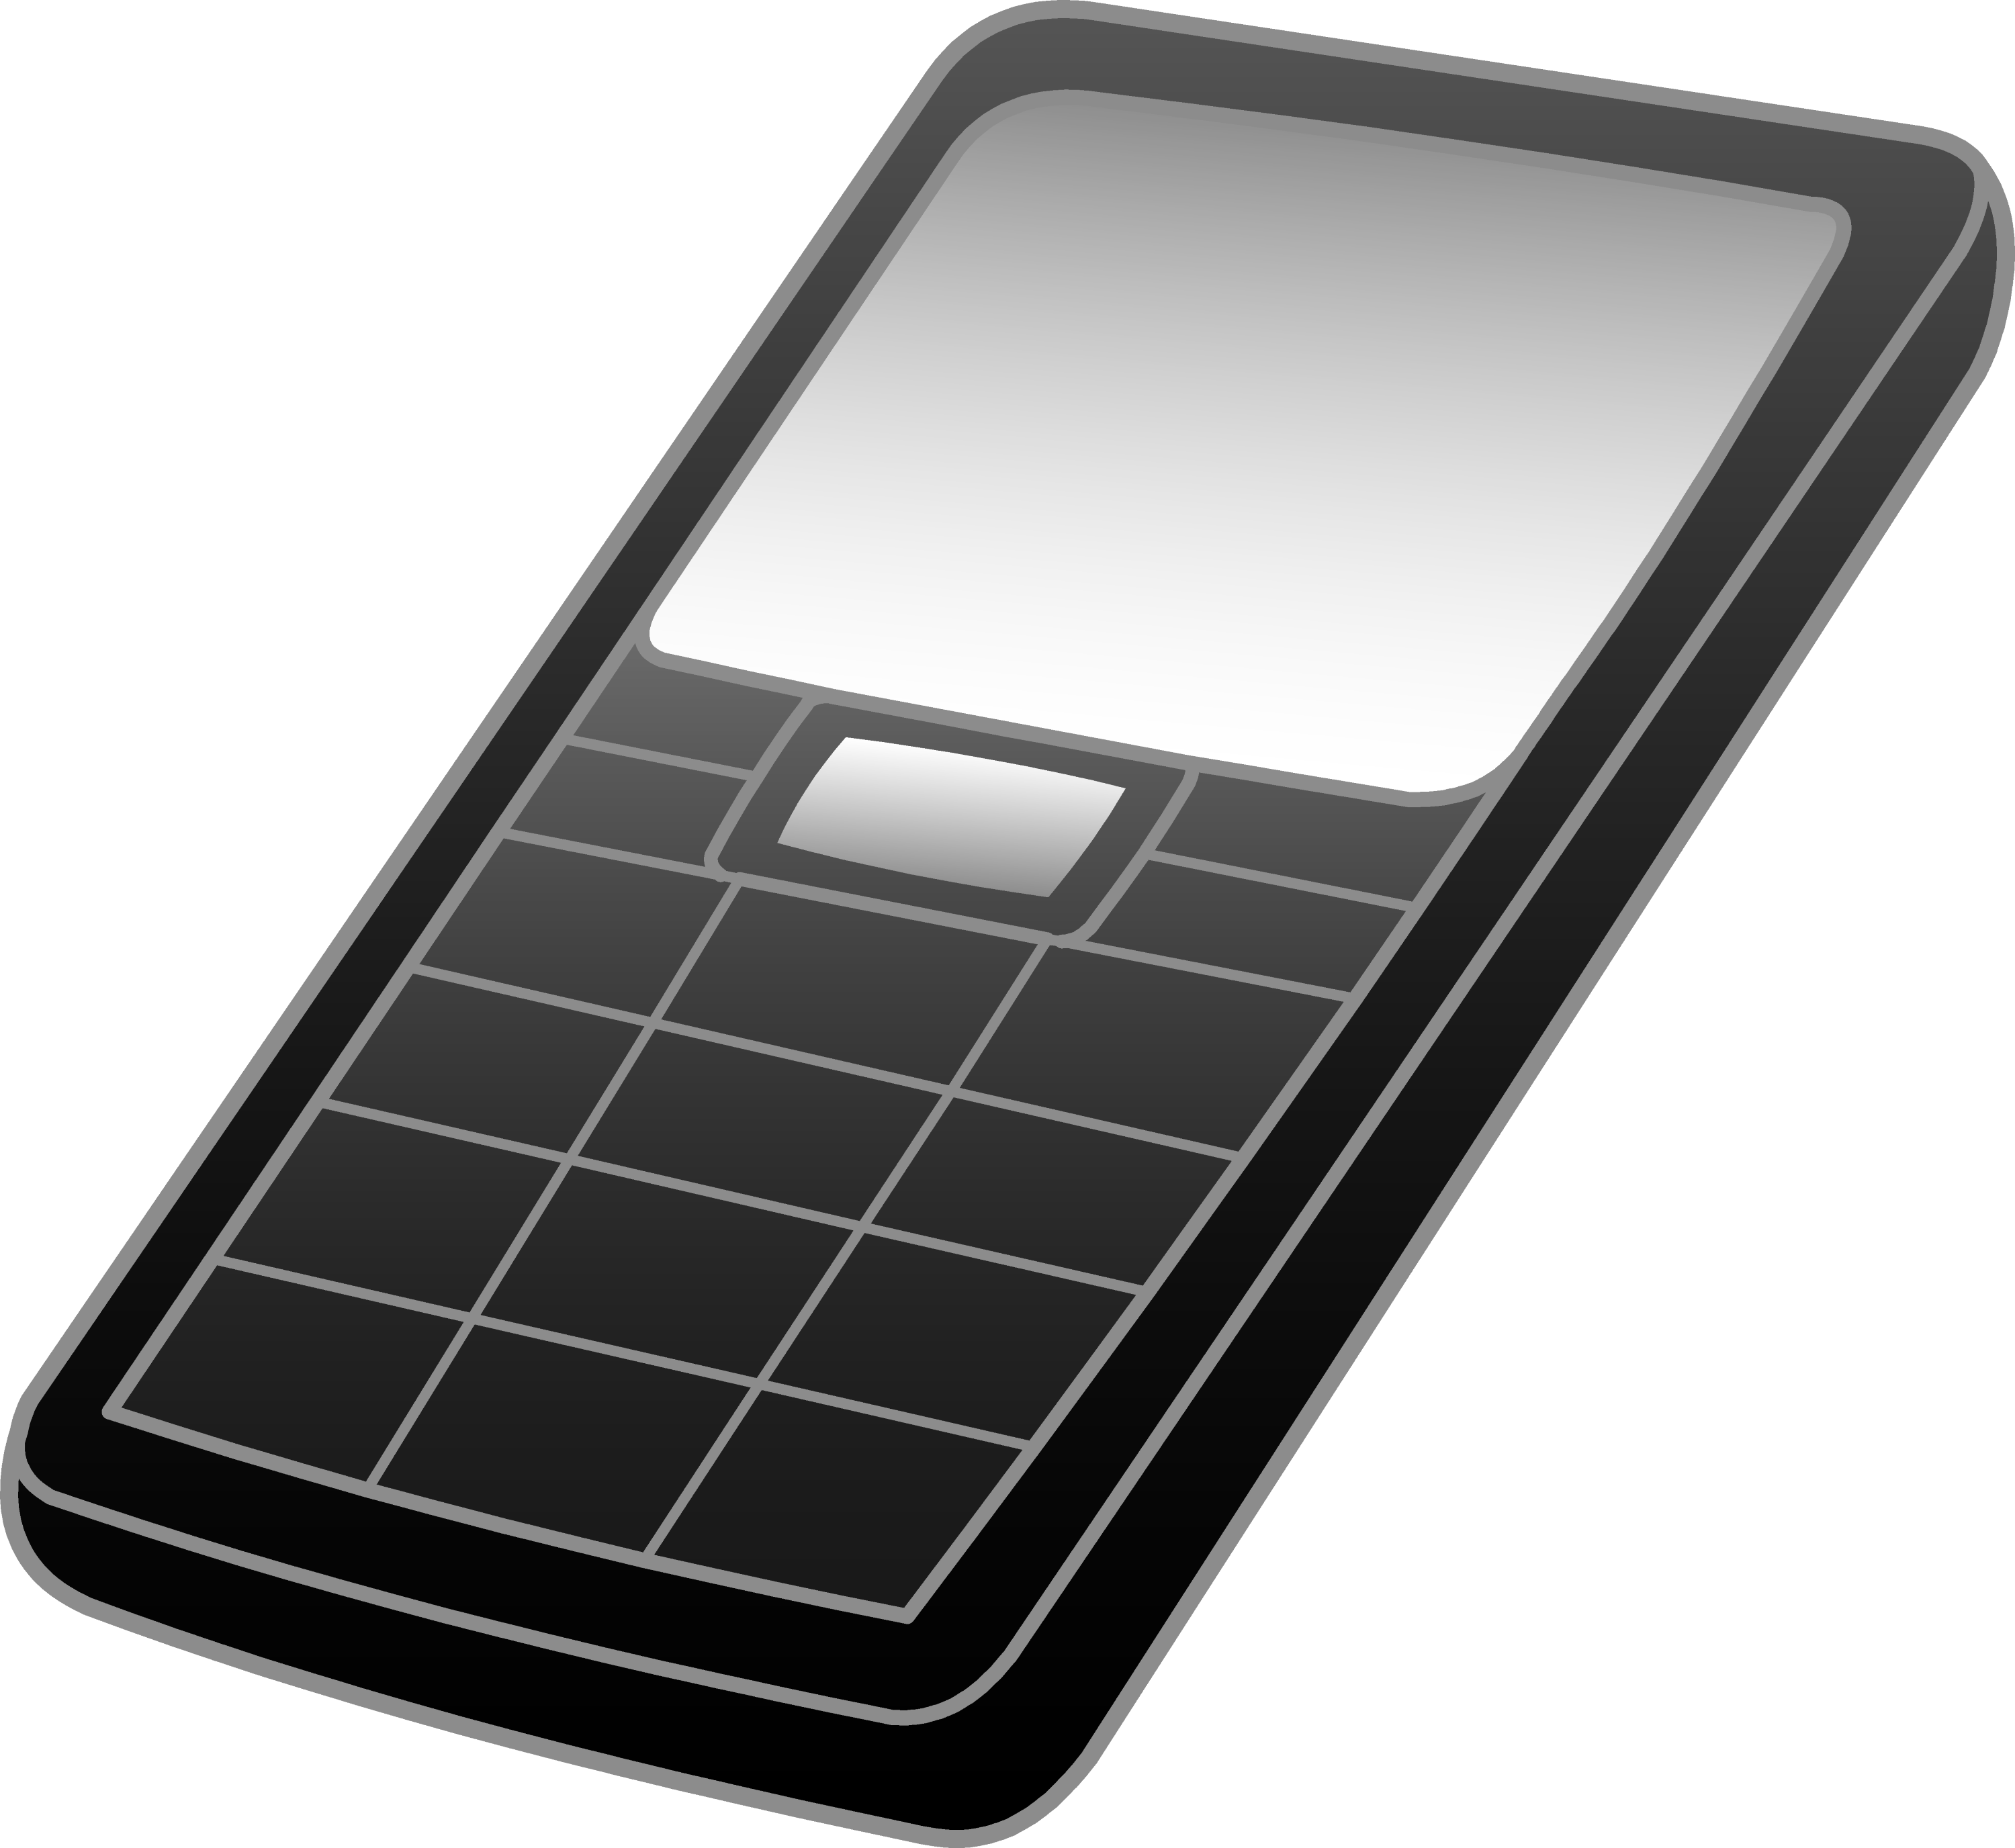 cell phone clipart black and white - photo #26